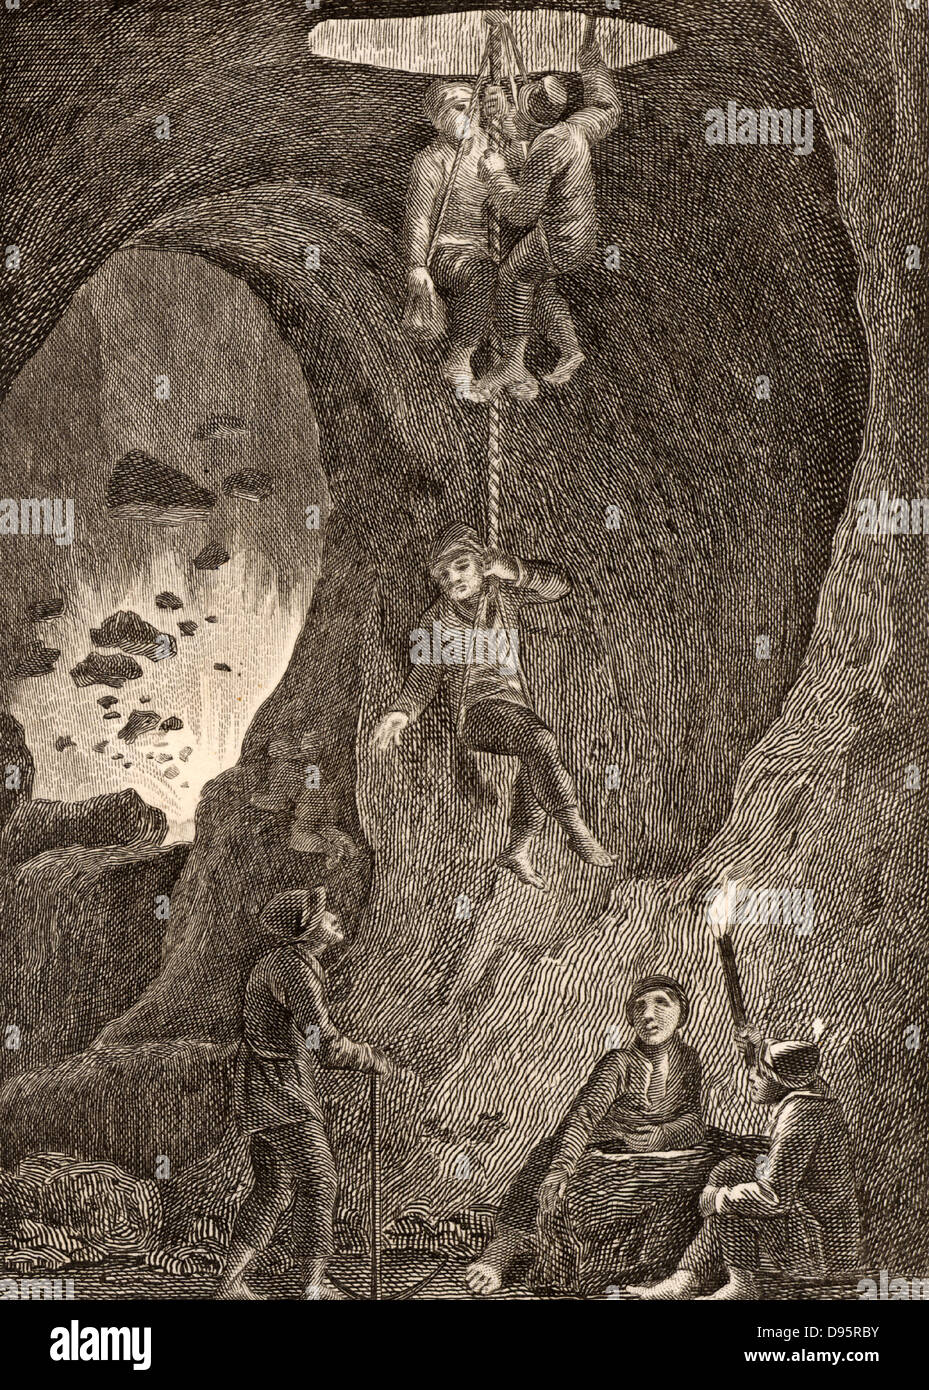 Miners being lowered by ropes into the silver mines near Bansk Stiavnica (also called Selmechbanya or Scheminitz) in central Slovakia. From the 11th century until 1918 it was part of the kingdom of Hungary. Engraving, 1805. Stock Photo